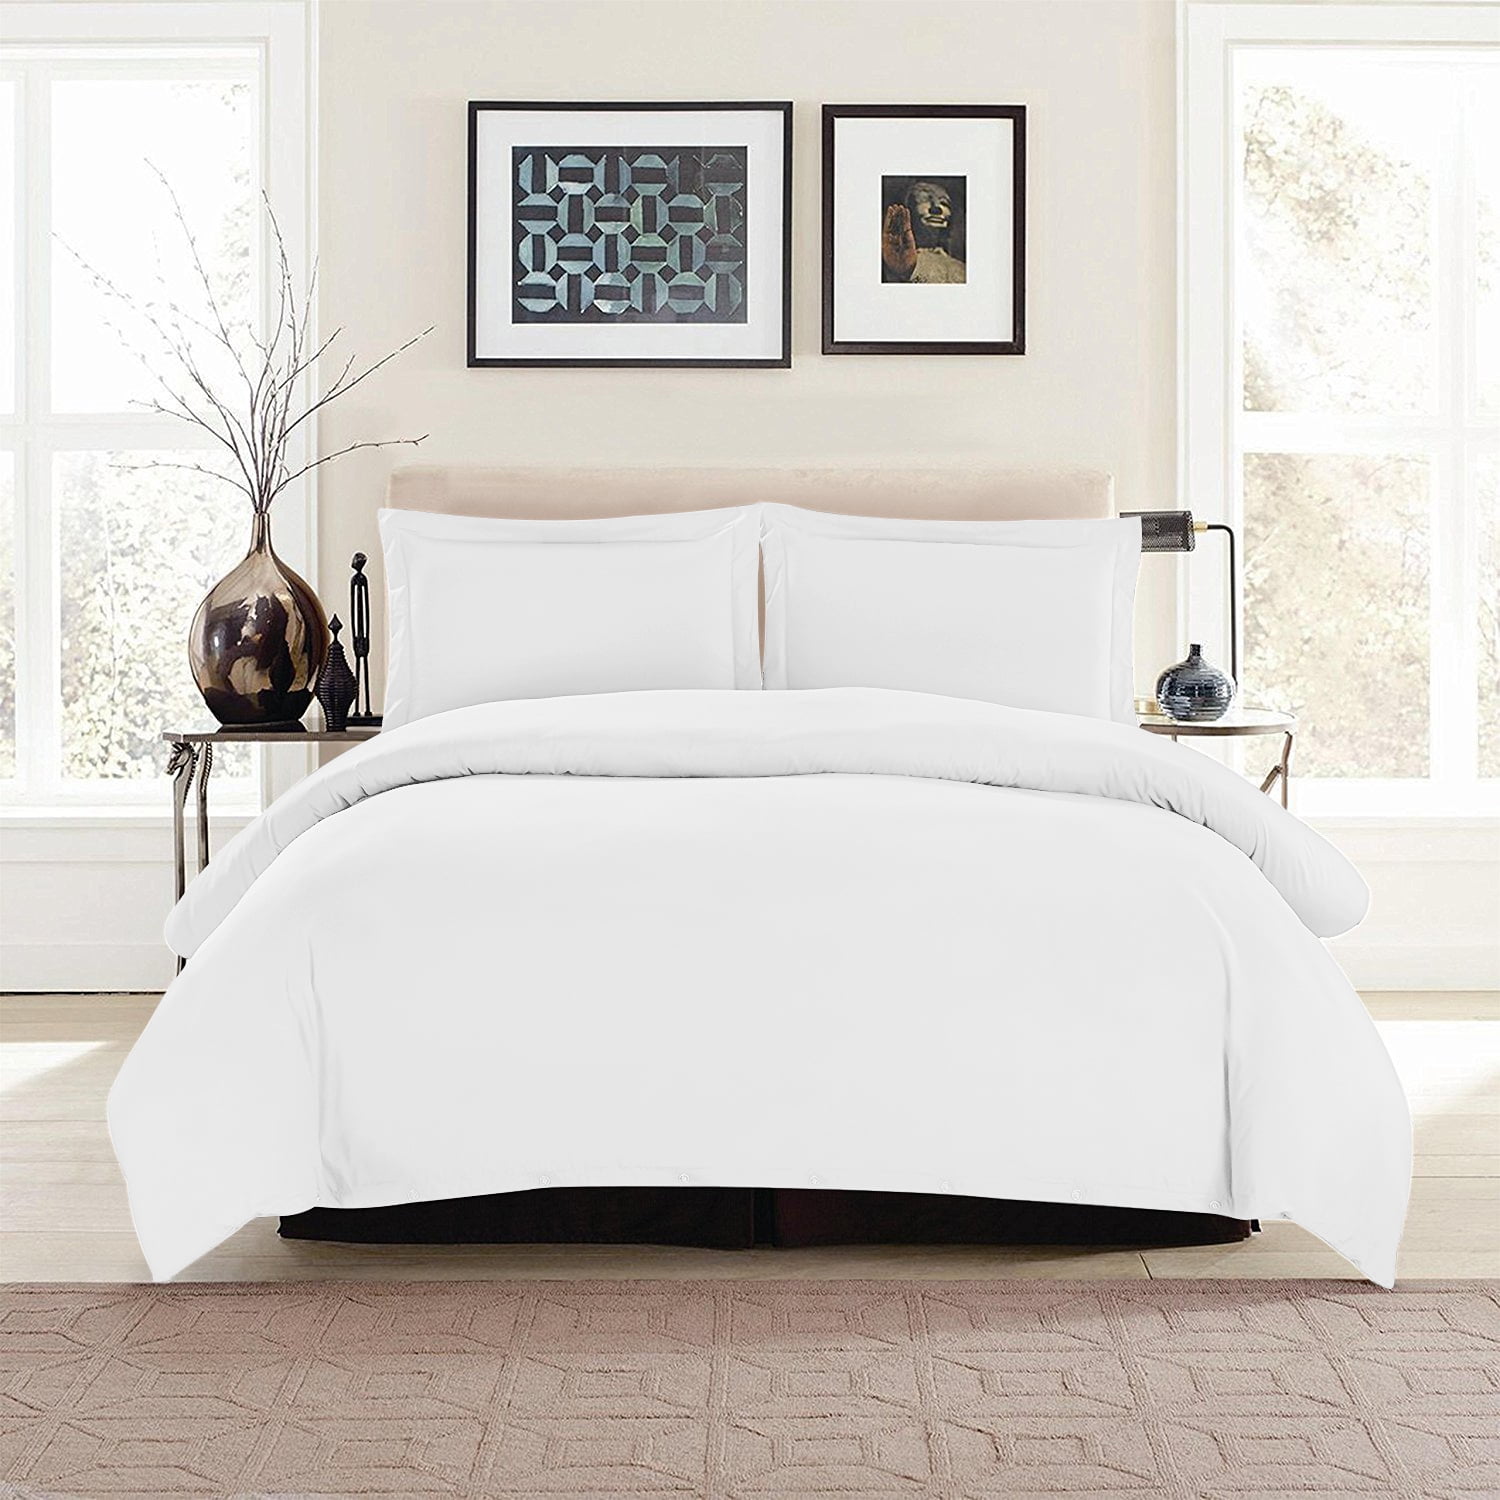 Lux Decor Collection king size hypoallergenic comforter 